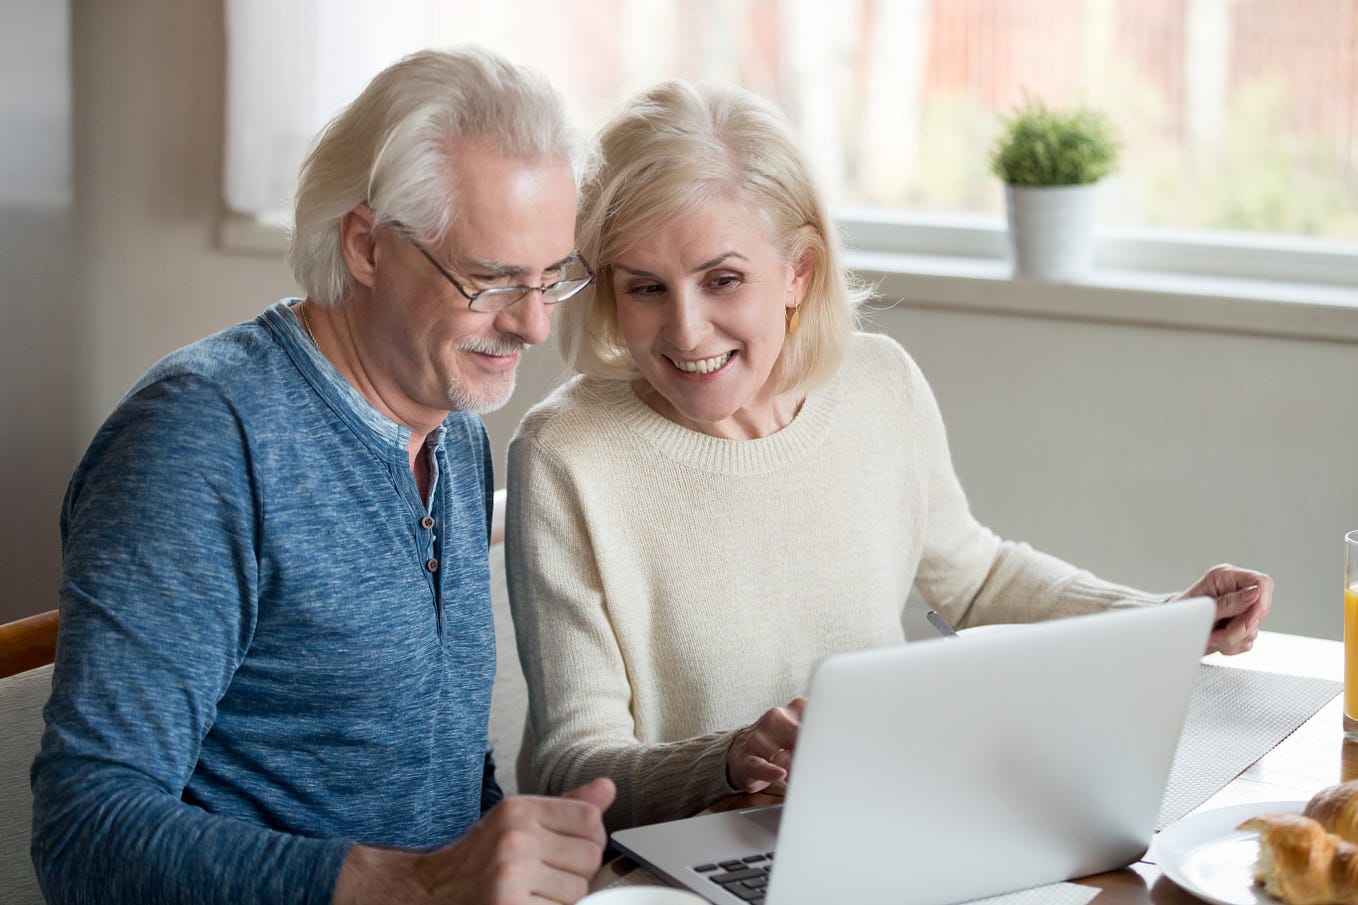 Why Should You Buy Hearing Aids Online in the Covid-19 Era